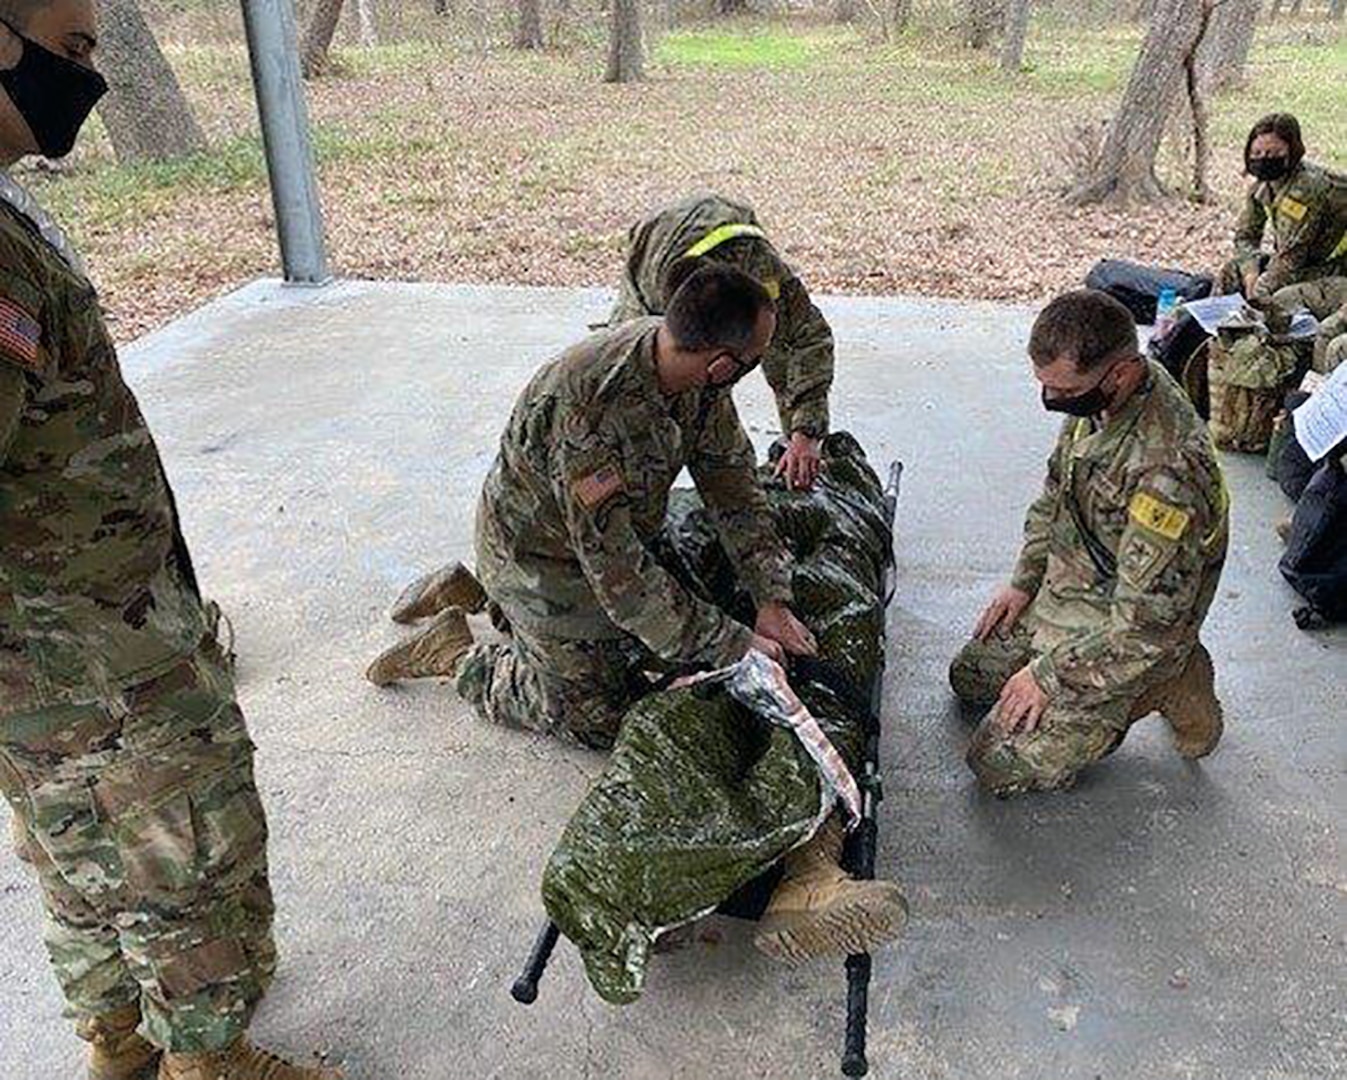 Advanced Individual Training Soldiers assigned to the U.S. Army Medical Center of Excellence demonstrate use of the sked and litter carries during patient evacuation during Soldier in Transition Training, or SiTT, at Joint Base San Antonio-Fort Sam Houston last month.